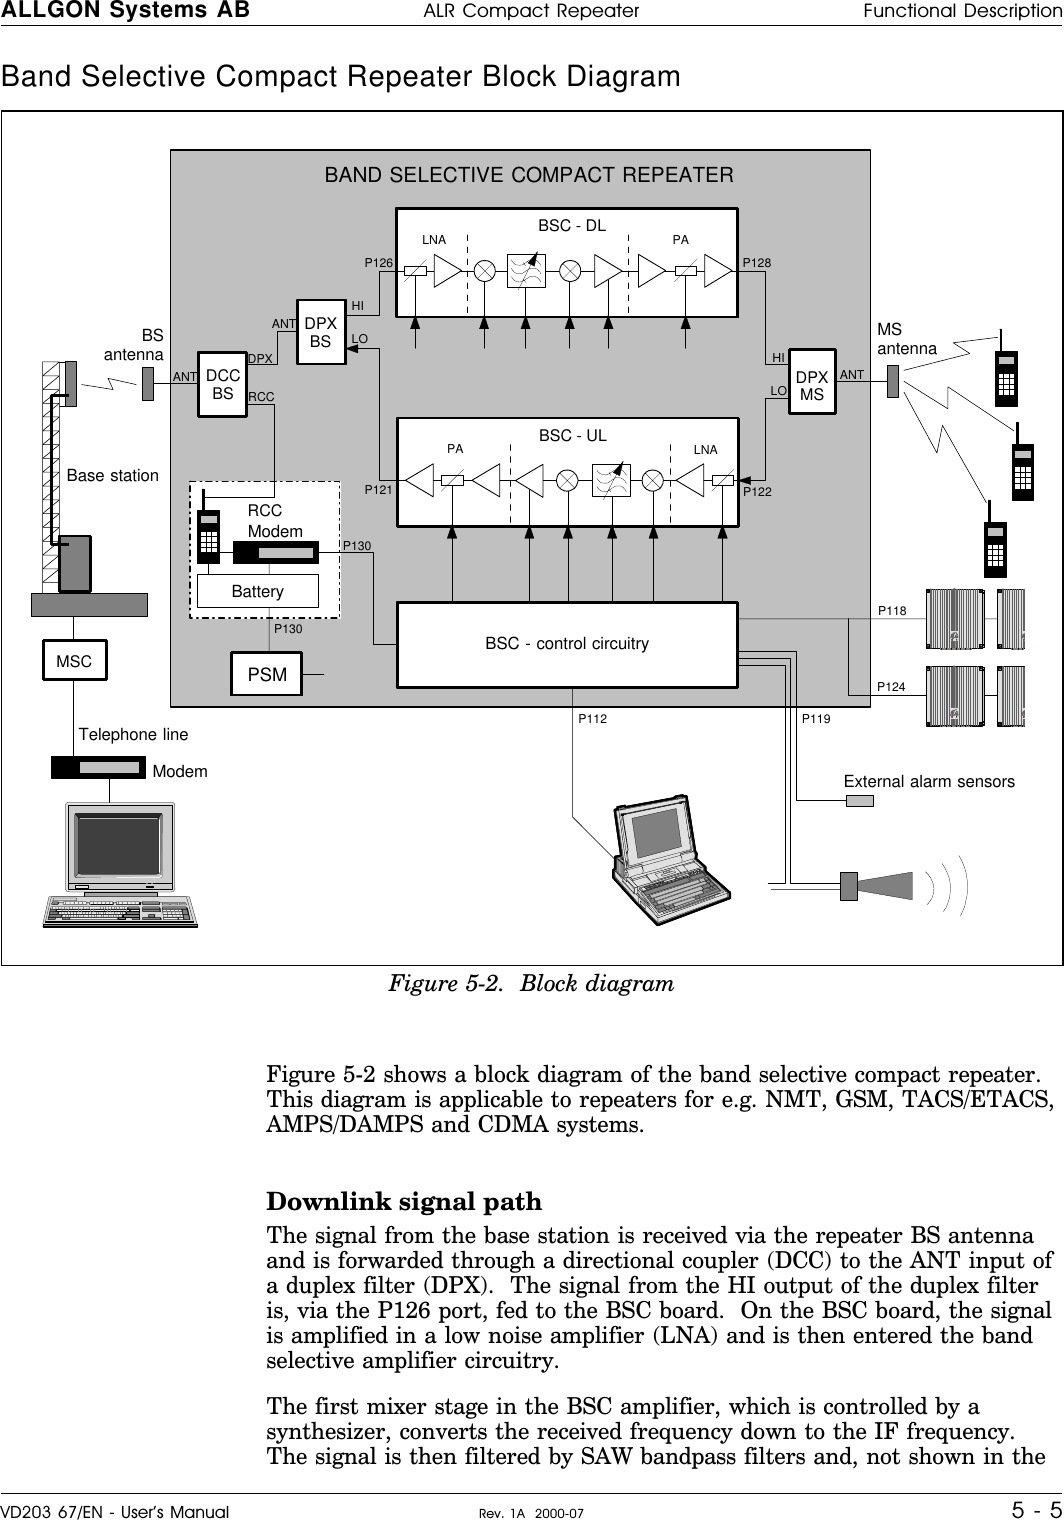 Band Selective Compact Repeater Block Diagram           Figure 5-2 shows a block diagram of the band selective compact repeater.This diagram is applicable to repeaters for e.g. NMT, GSM, TACS/ETACS,AMPS/DAMPS and CDMA systems.Downlink signal pathThe signal from the base station is received via the repeater BS antennaand is forwarded through a directional coupler (DCC) to the ANT input ofa duplex filter (DPX).  The signal from the HI output of the duplex filteris, via the P126 port, fed to the BSC board.  On the BSC board, the signalis amplified in a low noise amplifier (LNA) and is then entered the bandselective amplifier circuitry.The first mixer stage in the BSC amplifier, which is controlled by asynthesizer, converts the received frequency down to the IF frequency.The signal is then filtered by SAW bandpass filters and, not shown in theRCCBSC - ULPA LNAP121 P122BSC - DL PALNAP126 P128P130P112 P119P130DPXMSP118P124DCCBSANT LOHIHILOANTDPXBSMSC PSMANTRCCDPXBAND SELECTIVE COMPACT REPEATERBSantennaBase stationTelephone lineModemModemBatteryExternal alarm sensorsMSantennaBSC - control circuitryFigure 5-2.  Block diagramALLGON Systems AB ALR Compact Repeater Functional DescriptionVD203 67/EN - User’s Manual Rev. 1A  2000-07 5 - 5